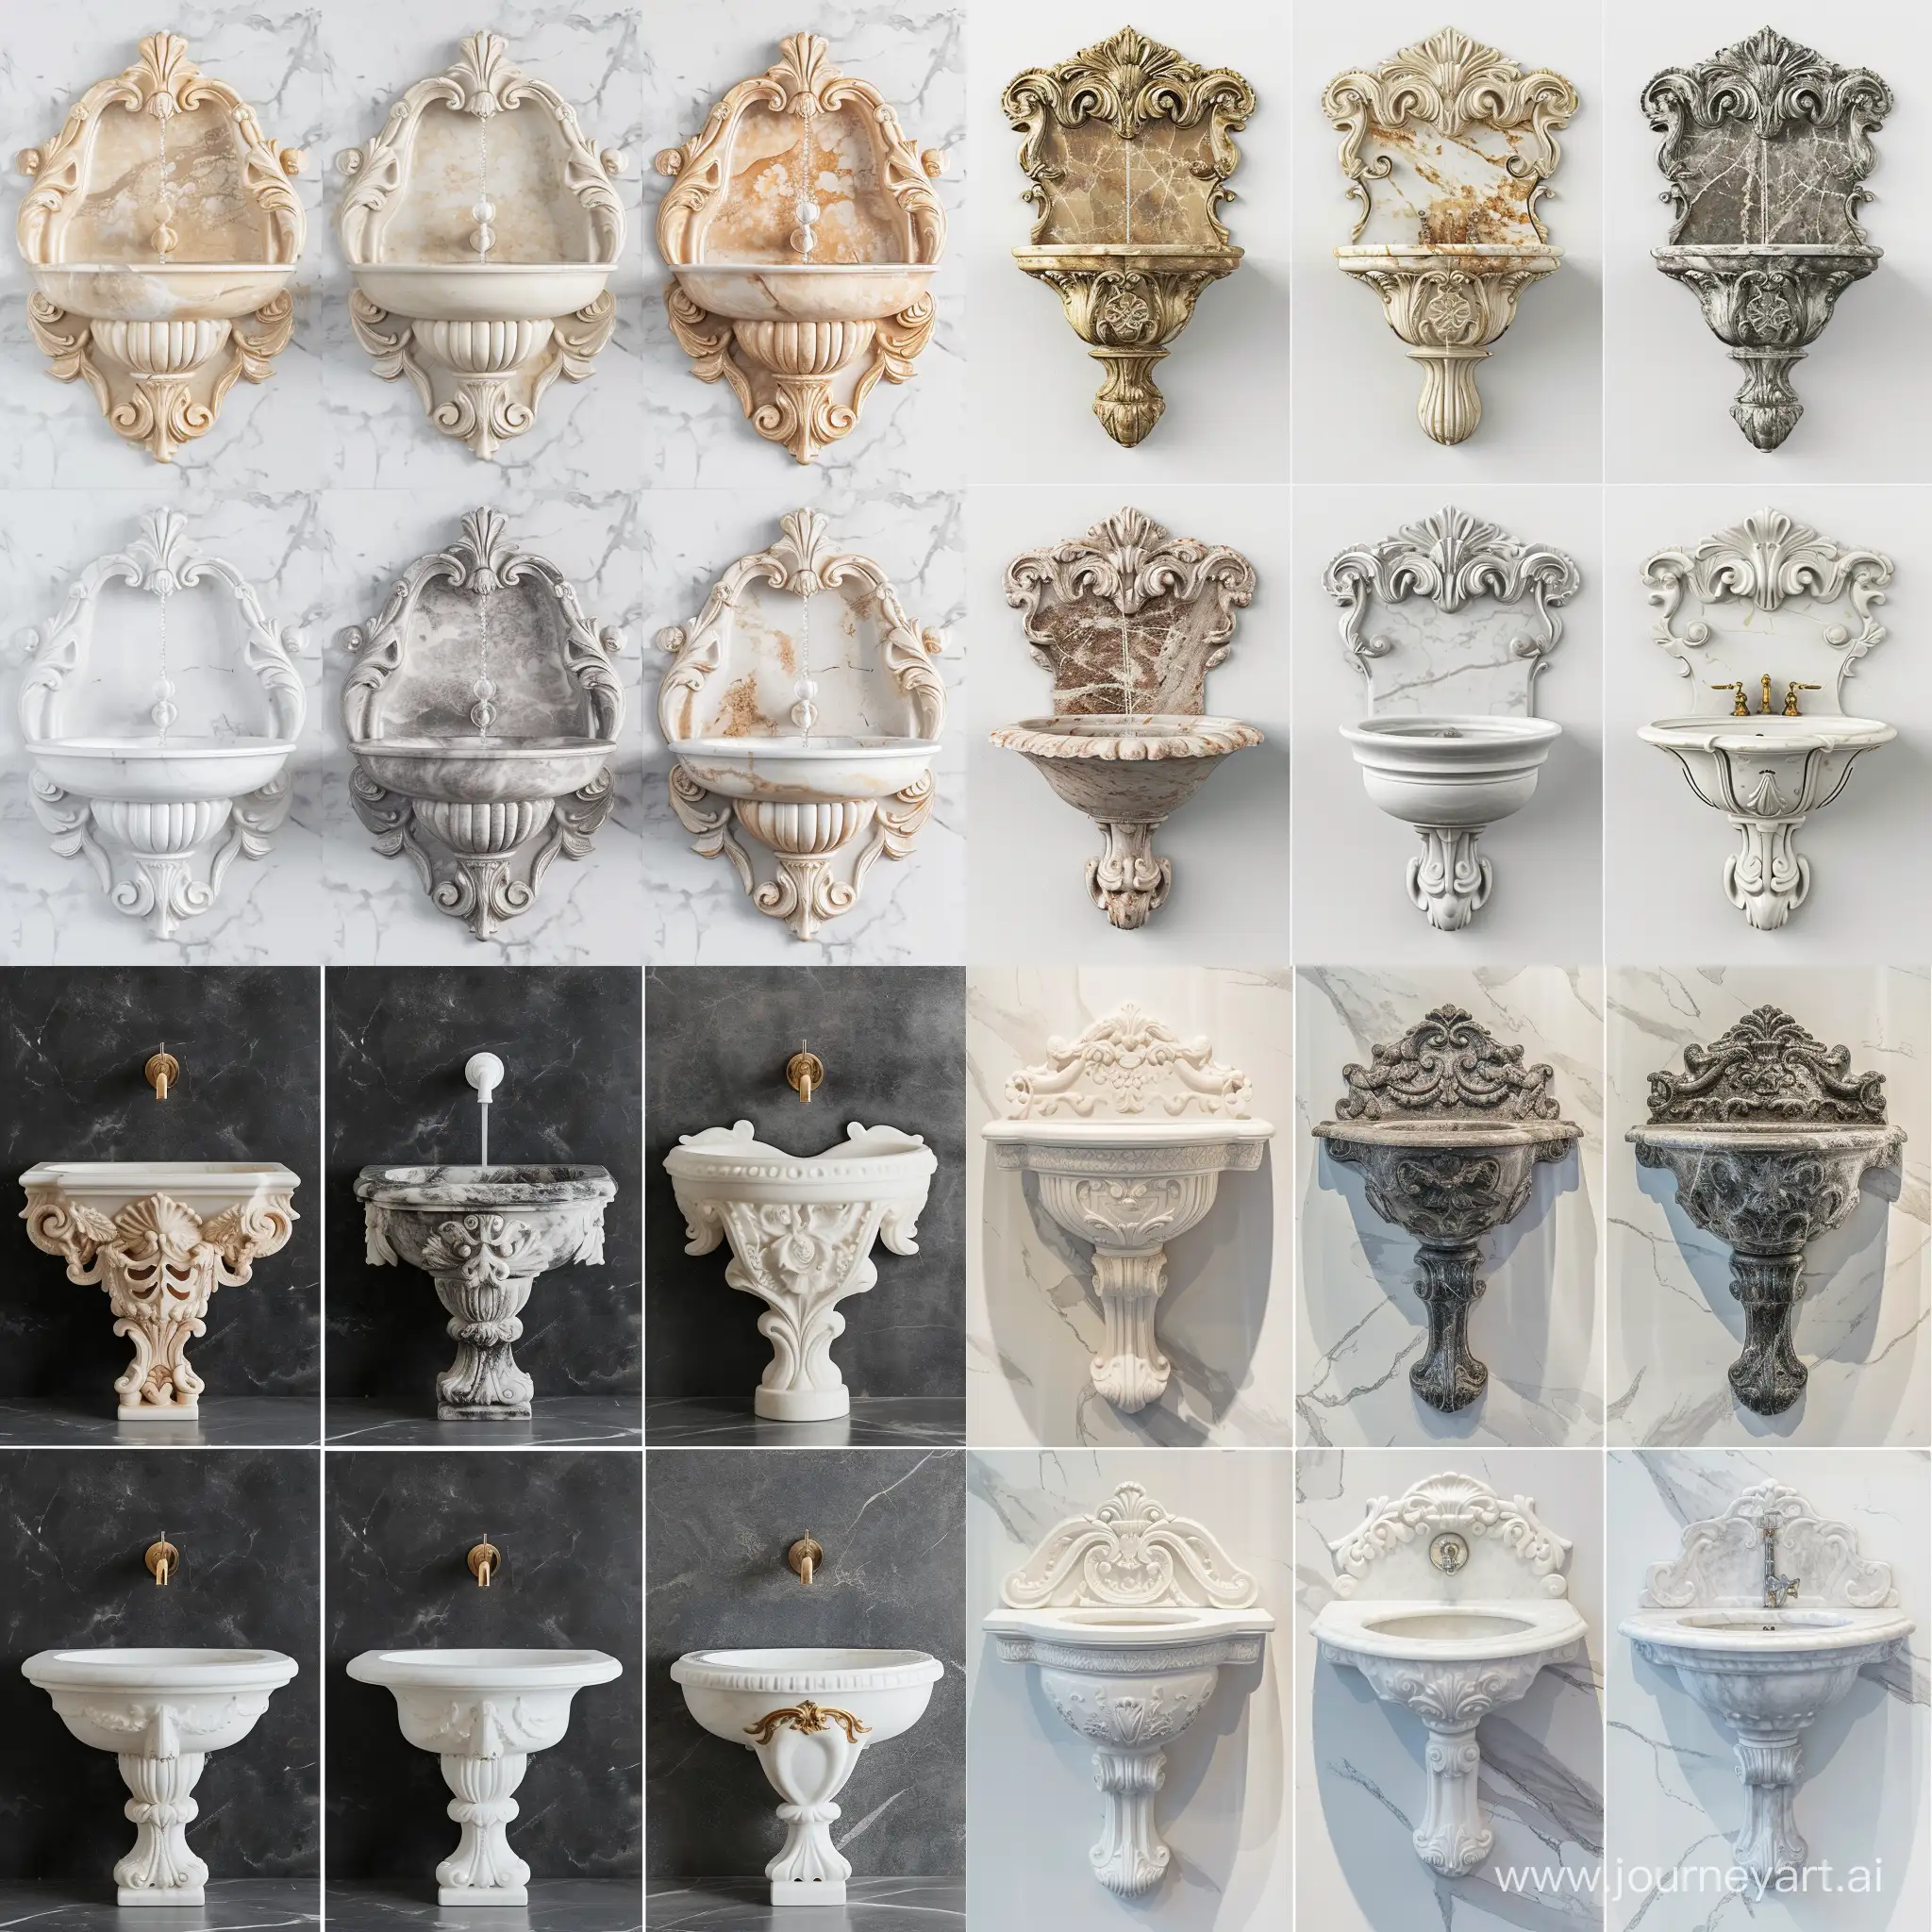 Exquisite-Baroque-Wall-Fountains-and-Rococo-Sinks-Collection